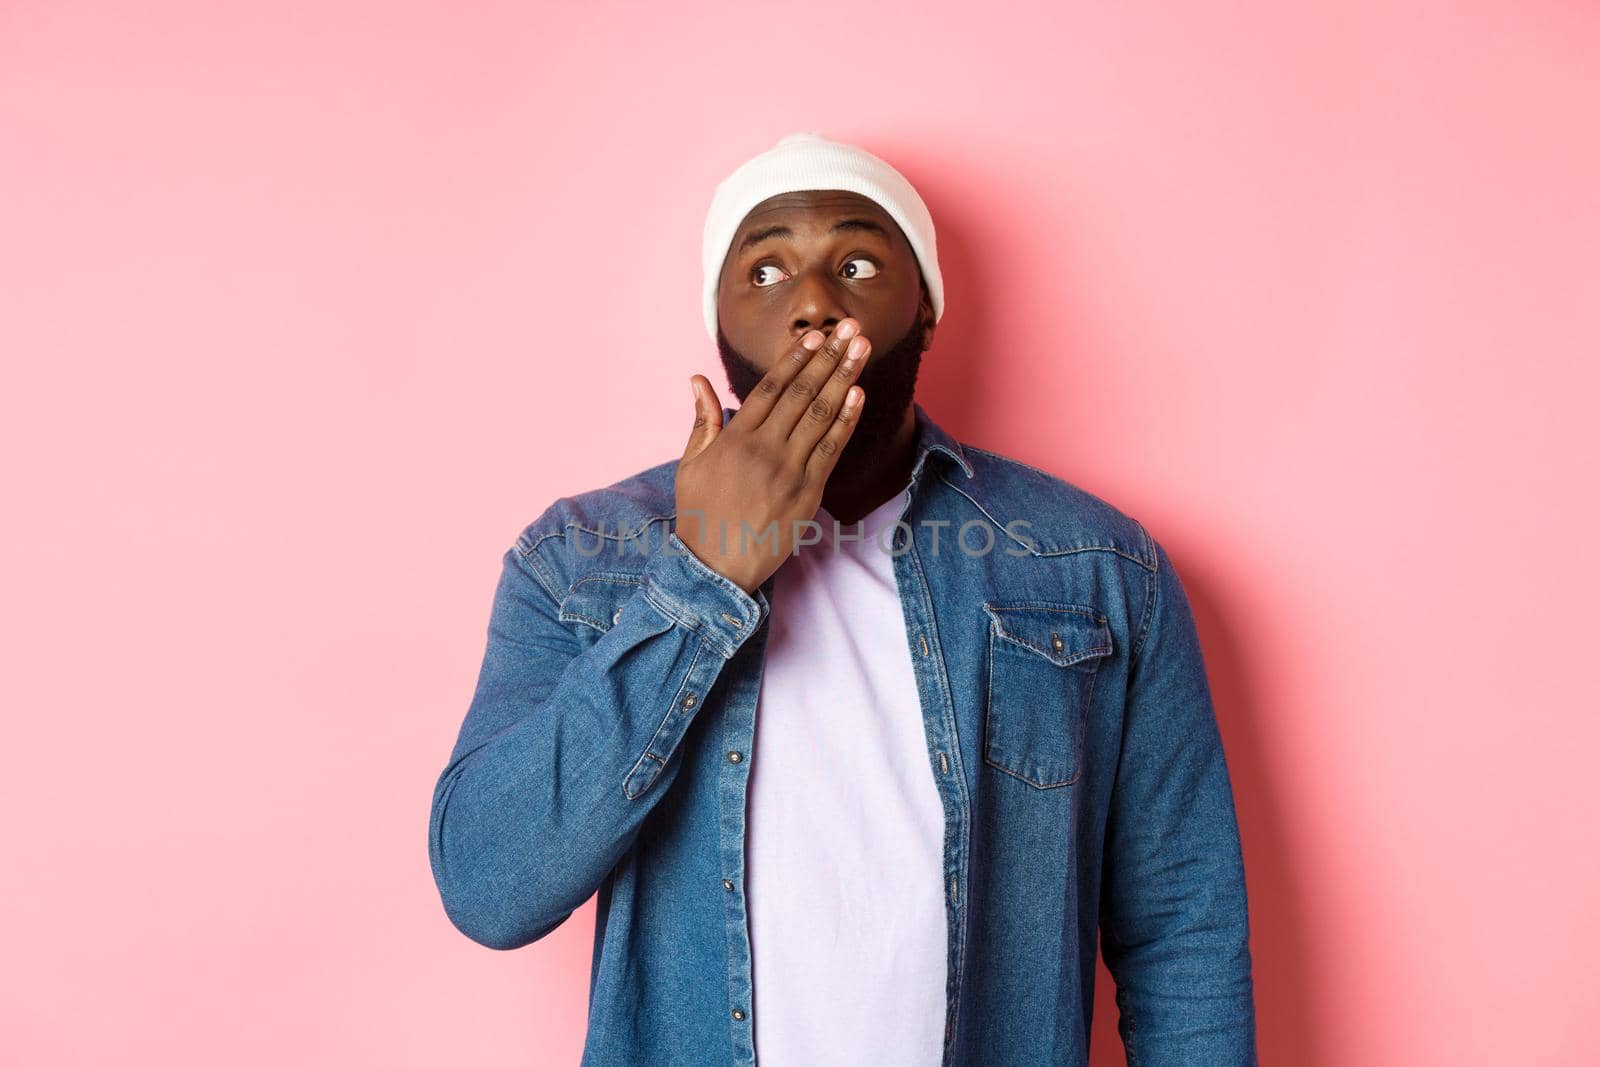 Shocked african-american man gasping, staring left in awe, gossiping, standing over pink background.